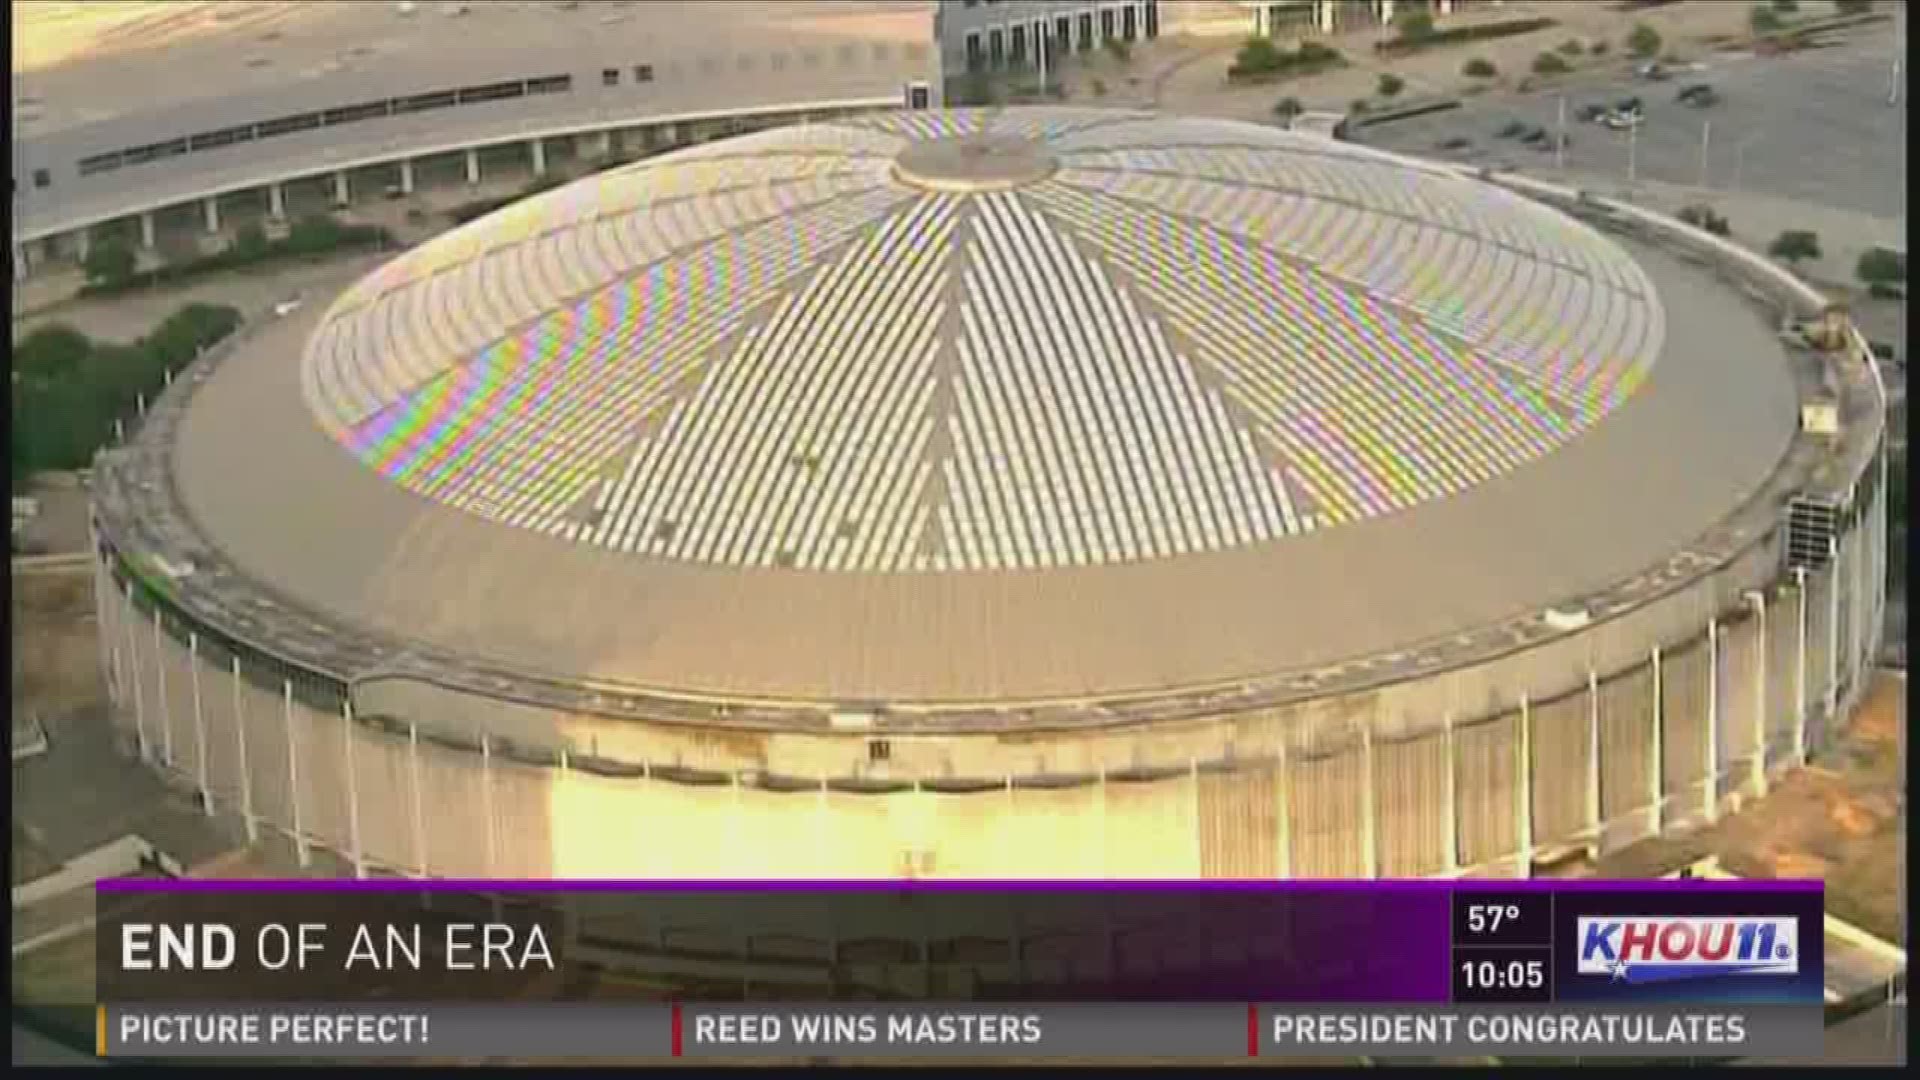 Legendary Astrodome turns 50 years old